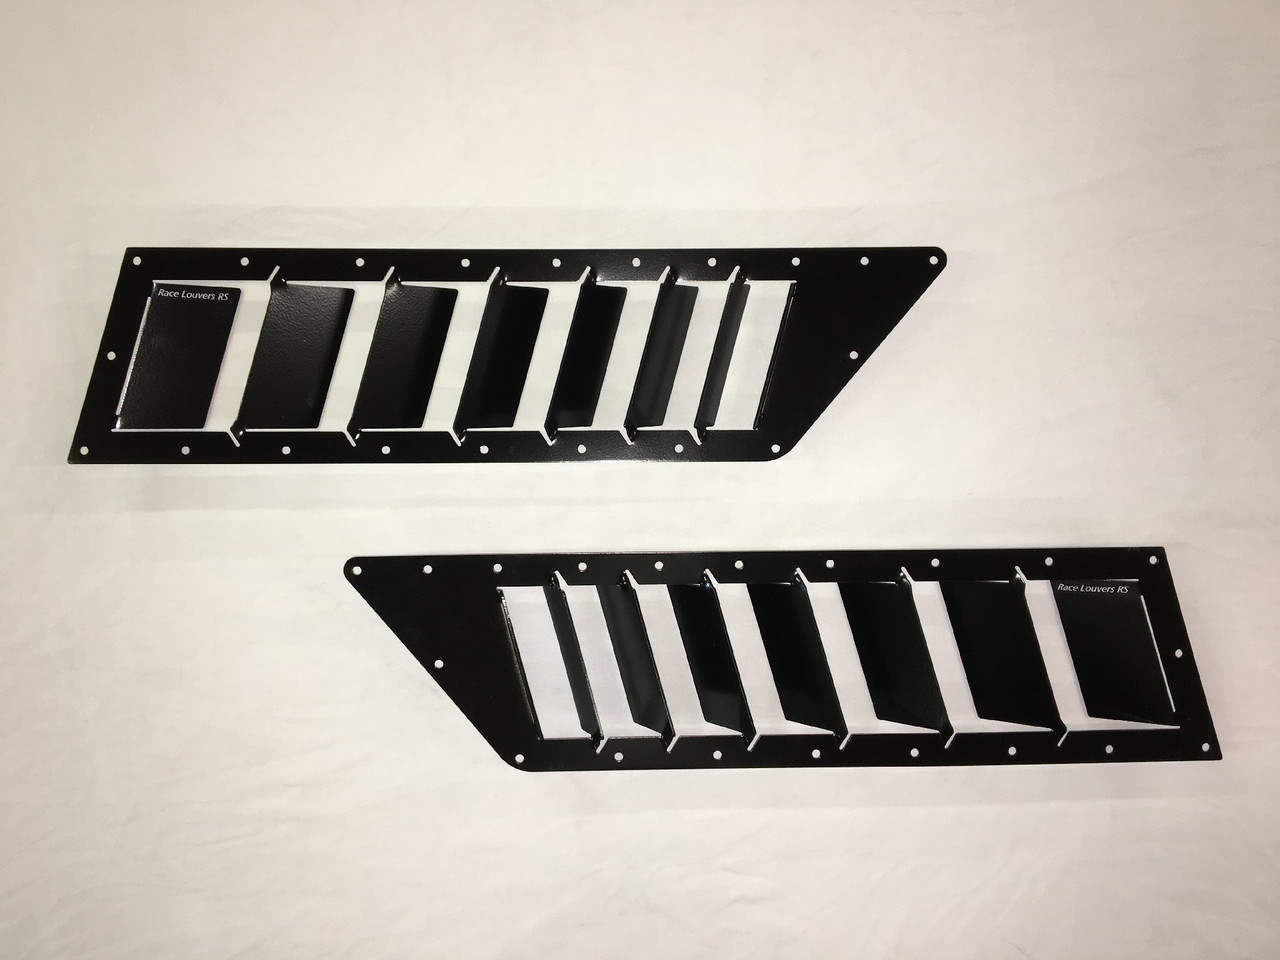 Race Louver RS trim car hood vent designed for street, high performance driving and light track duty.